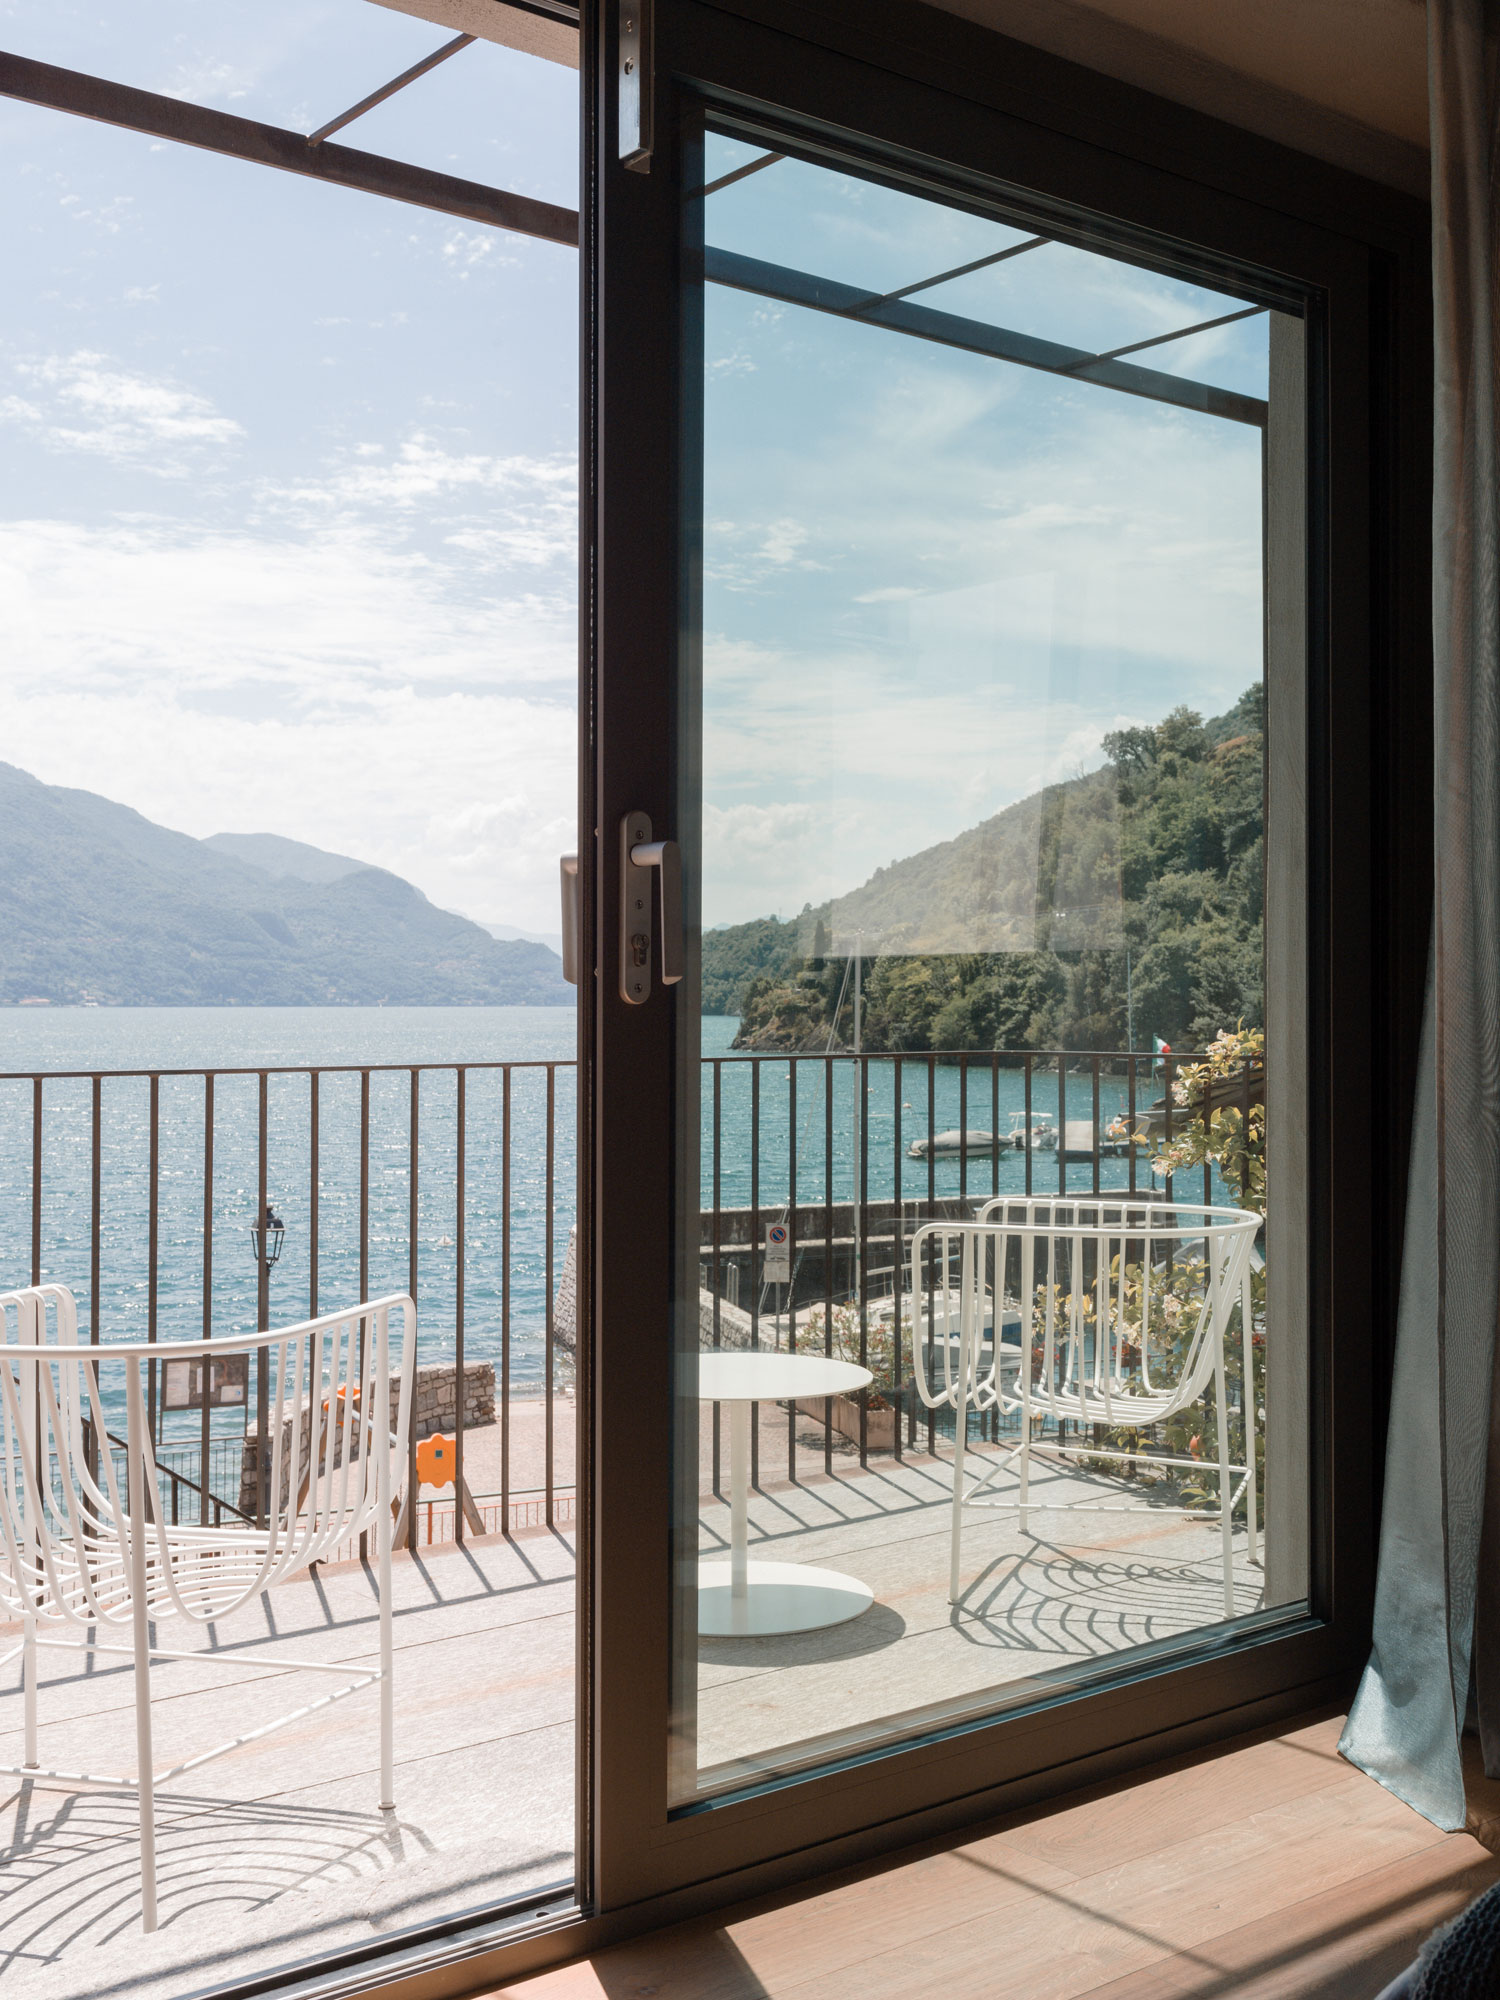 Casa Olea Hotel is a renovated old vicarage located in Cremia, Lake Como - Italy. Each Deluxe room has breath taking views over the lake and the mountains from private terrace.